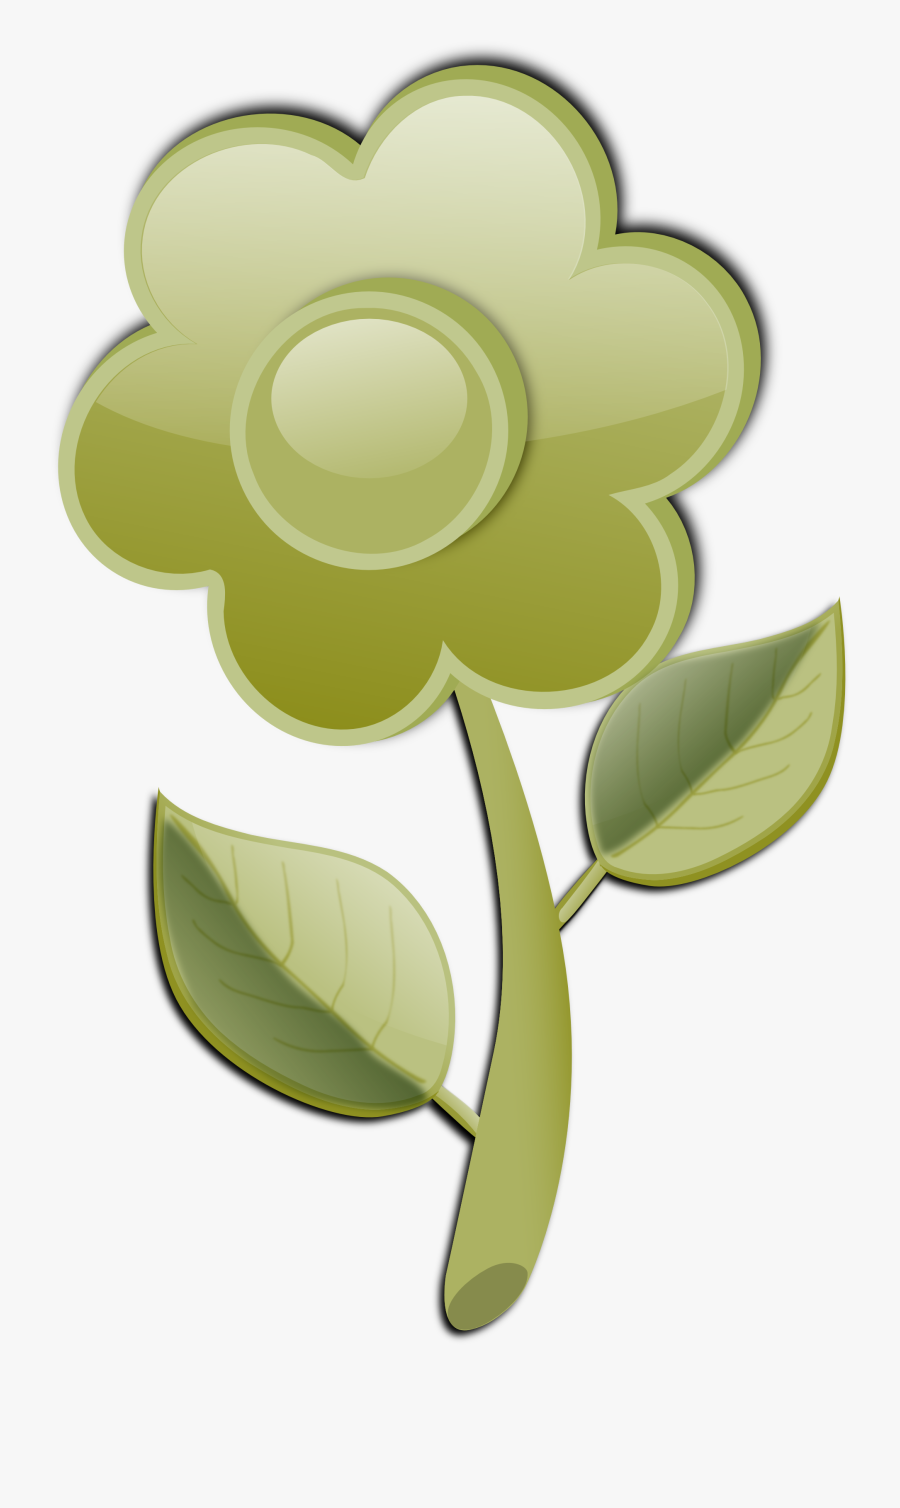 Flower Yellow With Stem Clipart, Transparent Clipart